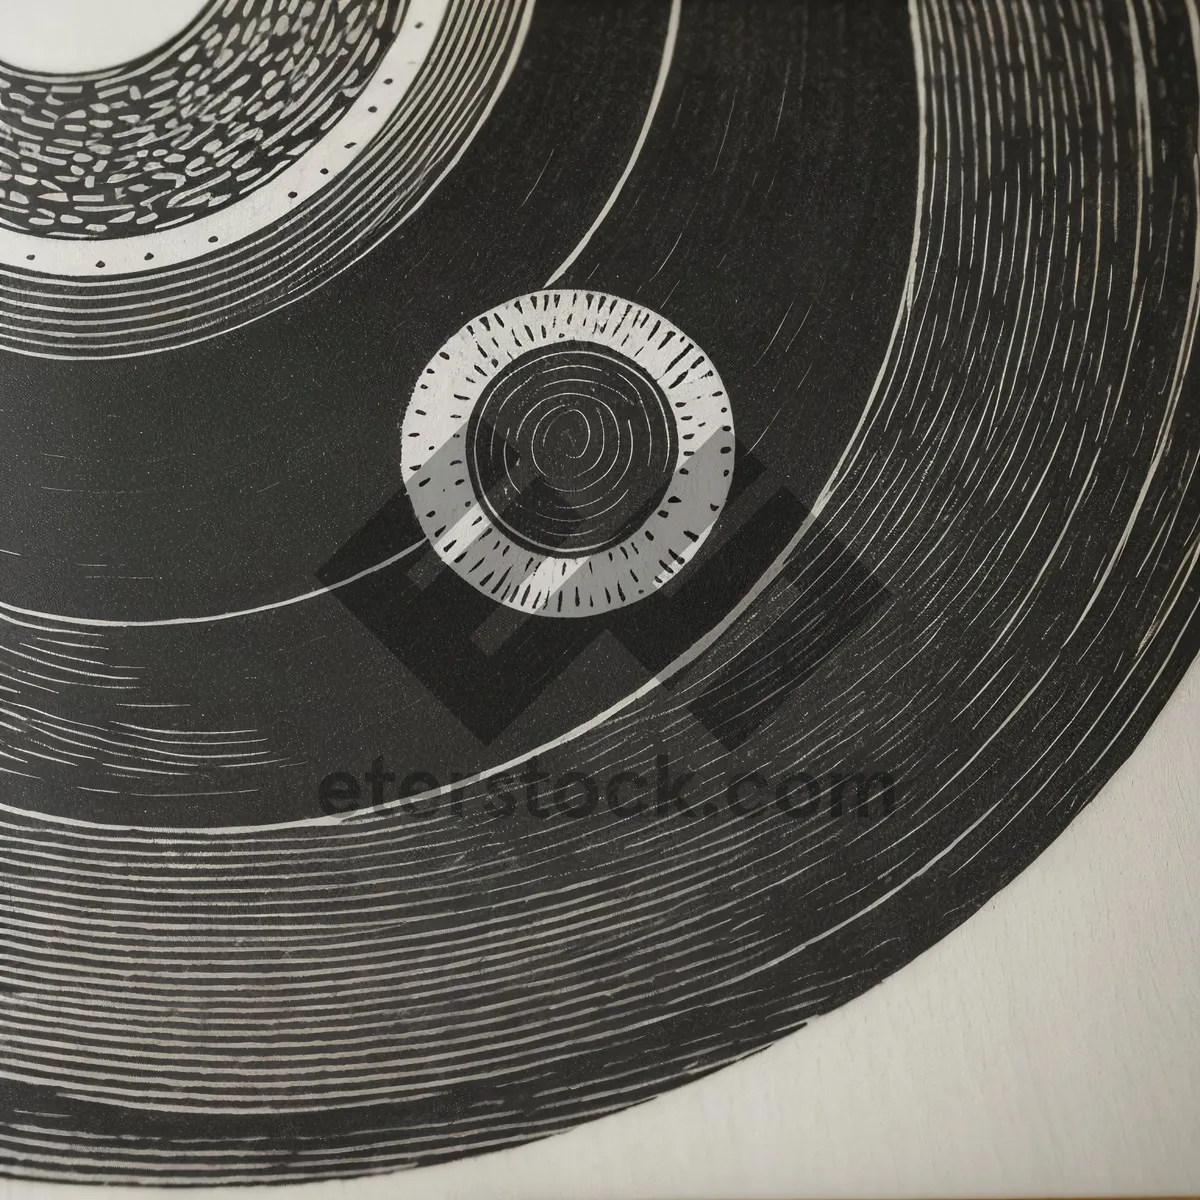 Picture of Sound Circle: Music-Film Reel and Phonograph Record Equipment